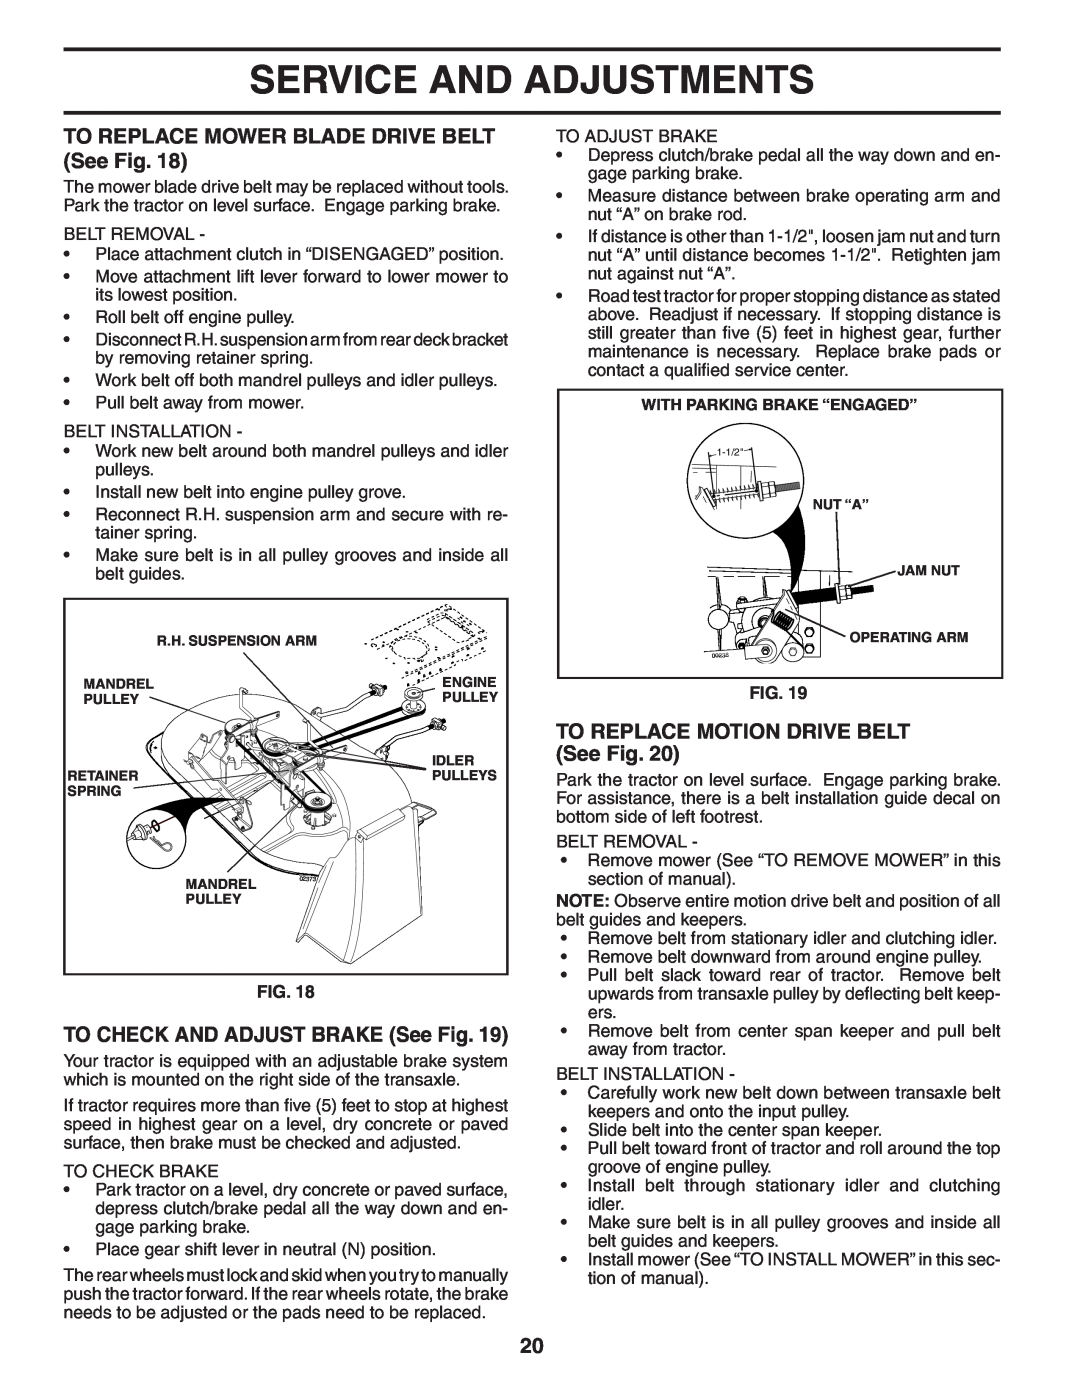 Poulan 192666 manual TO REPLACE MOWER BLADE DRIVE BELT See Fig, TO CHECK AND ADJUST BRAKE See Fig, Service And Adjustments 